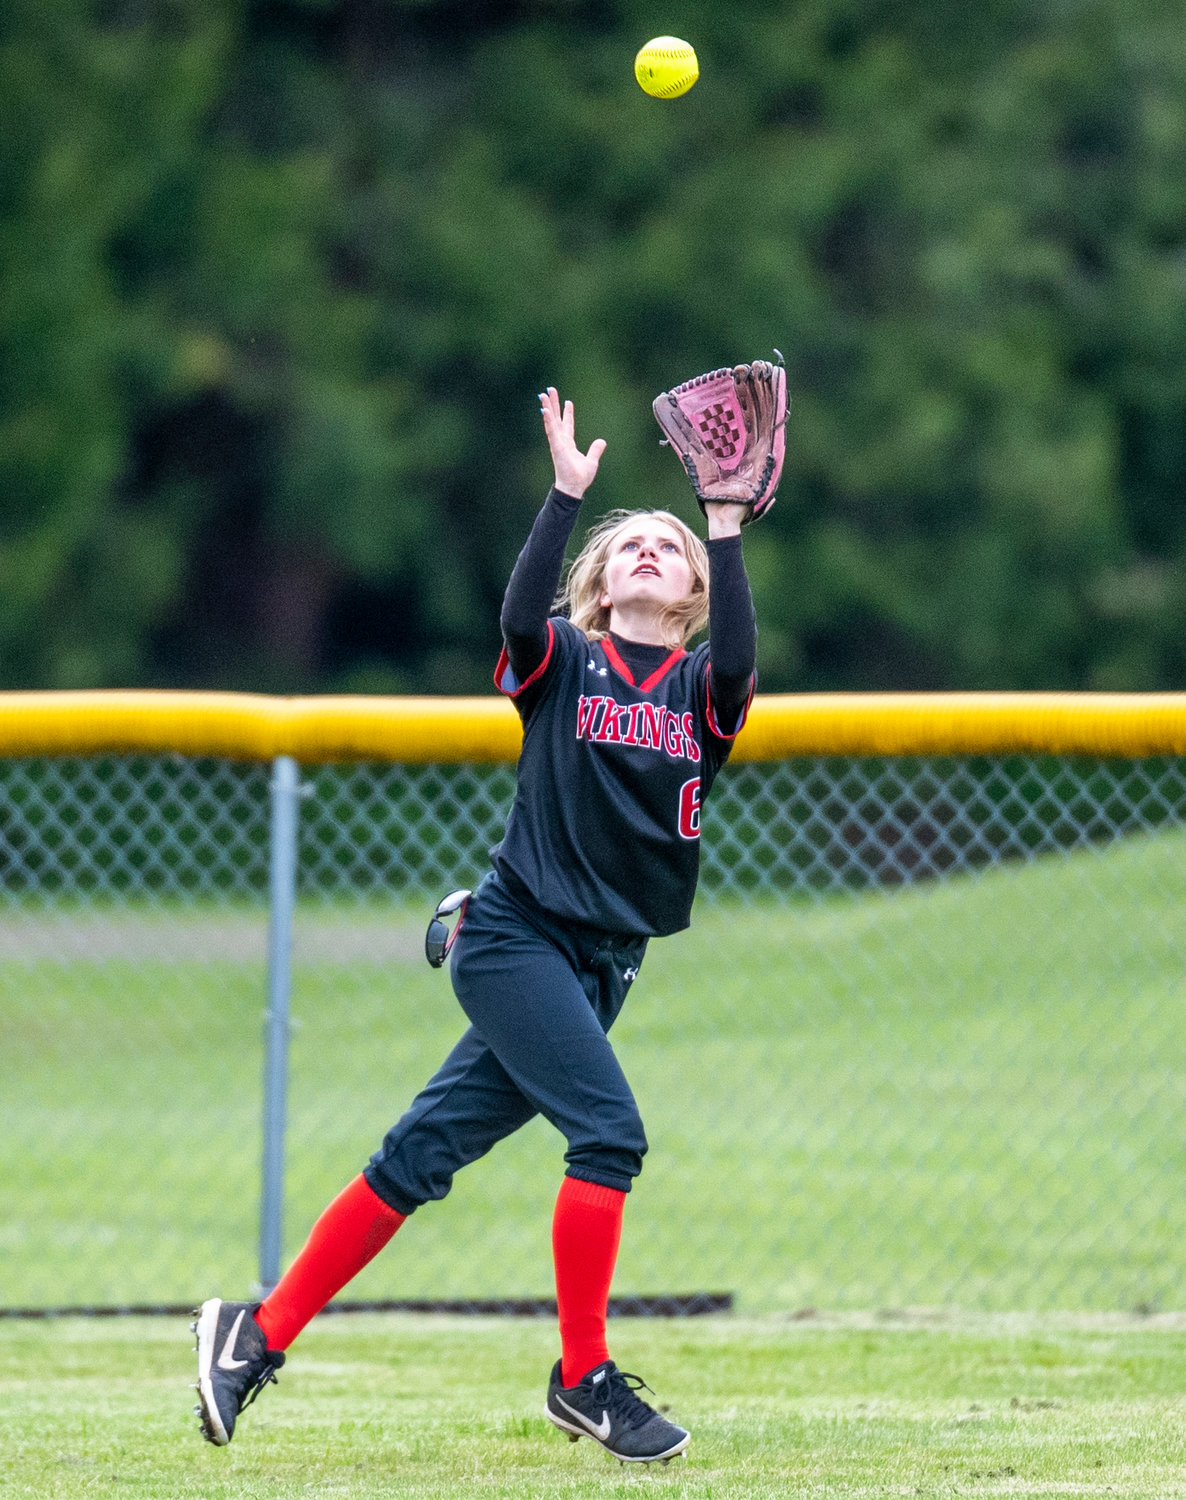 Mossyrock left fielder Addison Barrows catches a fly ball against Naselle on May 9.